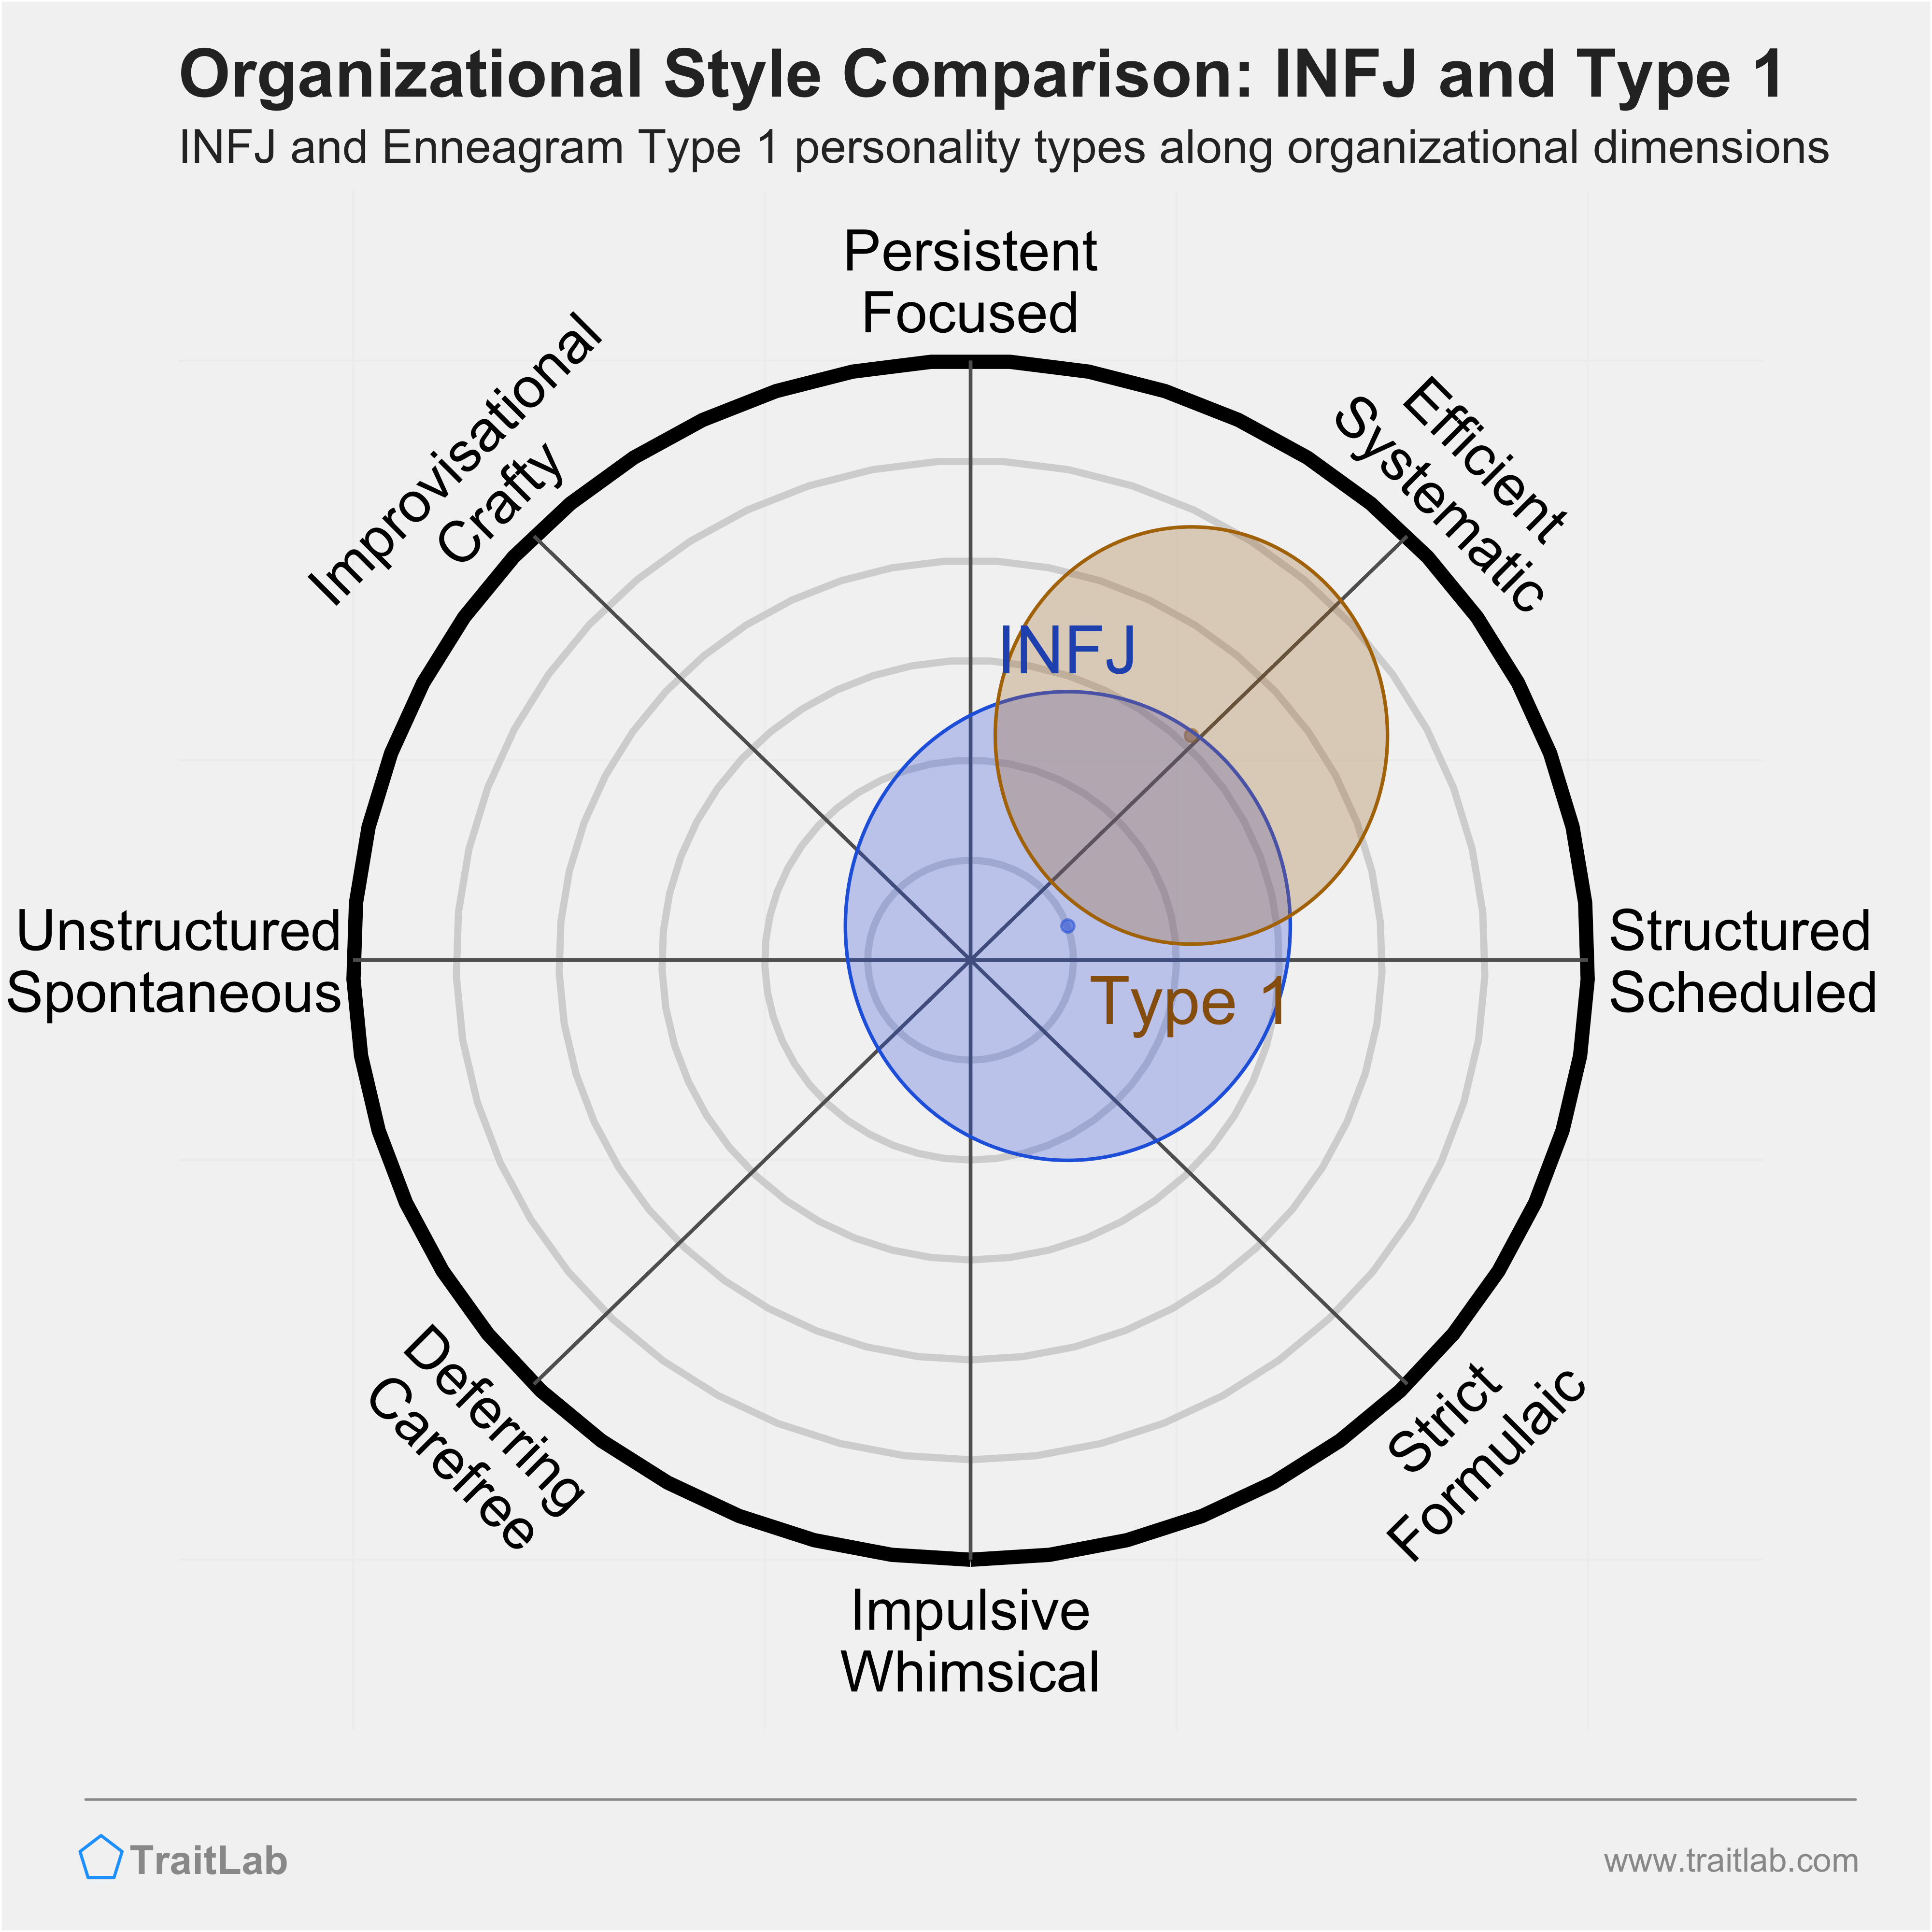 INFJ and Type 1 comparison across organizational dimensions